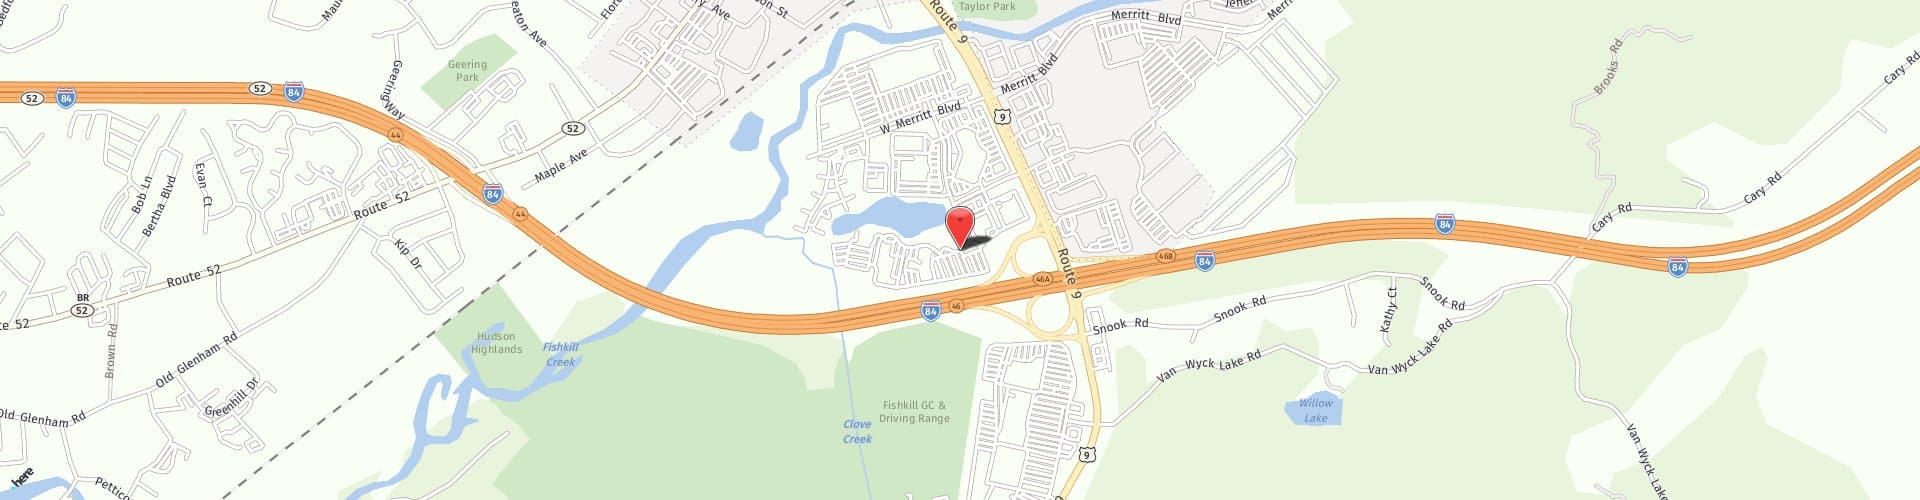 Location Map: 300 Westage Business Center Drive Fishkill, NY 12524